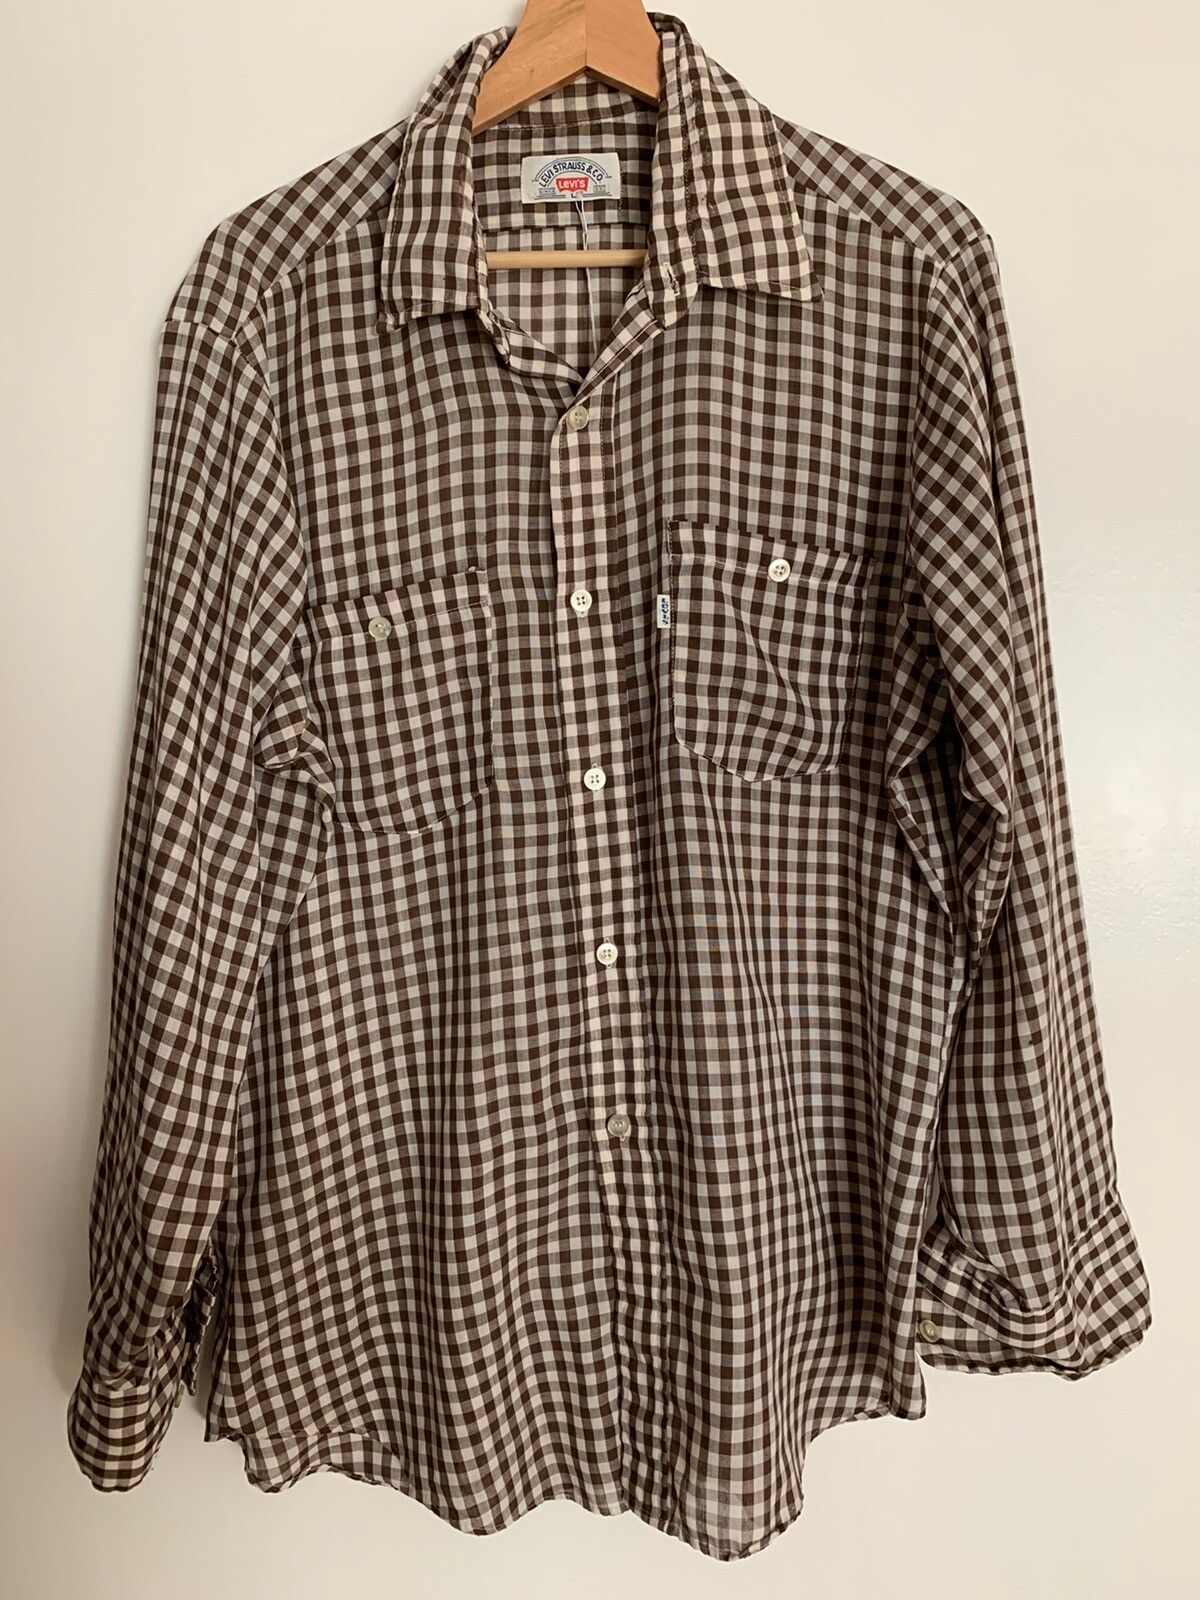 Levi's Vintage gingham long sleeve button down shirt | Grailed